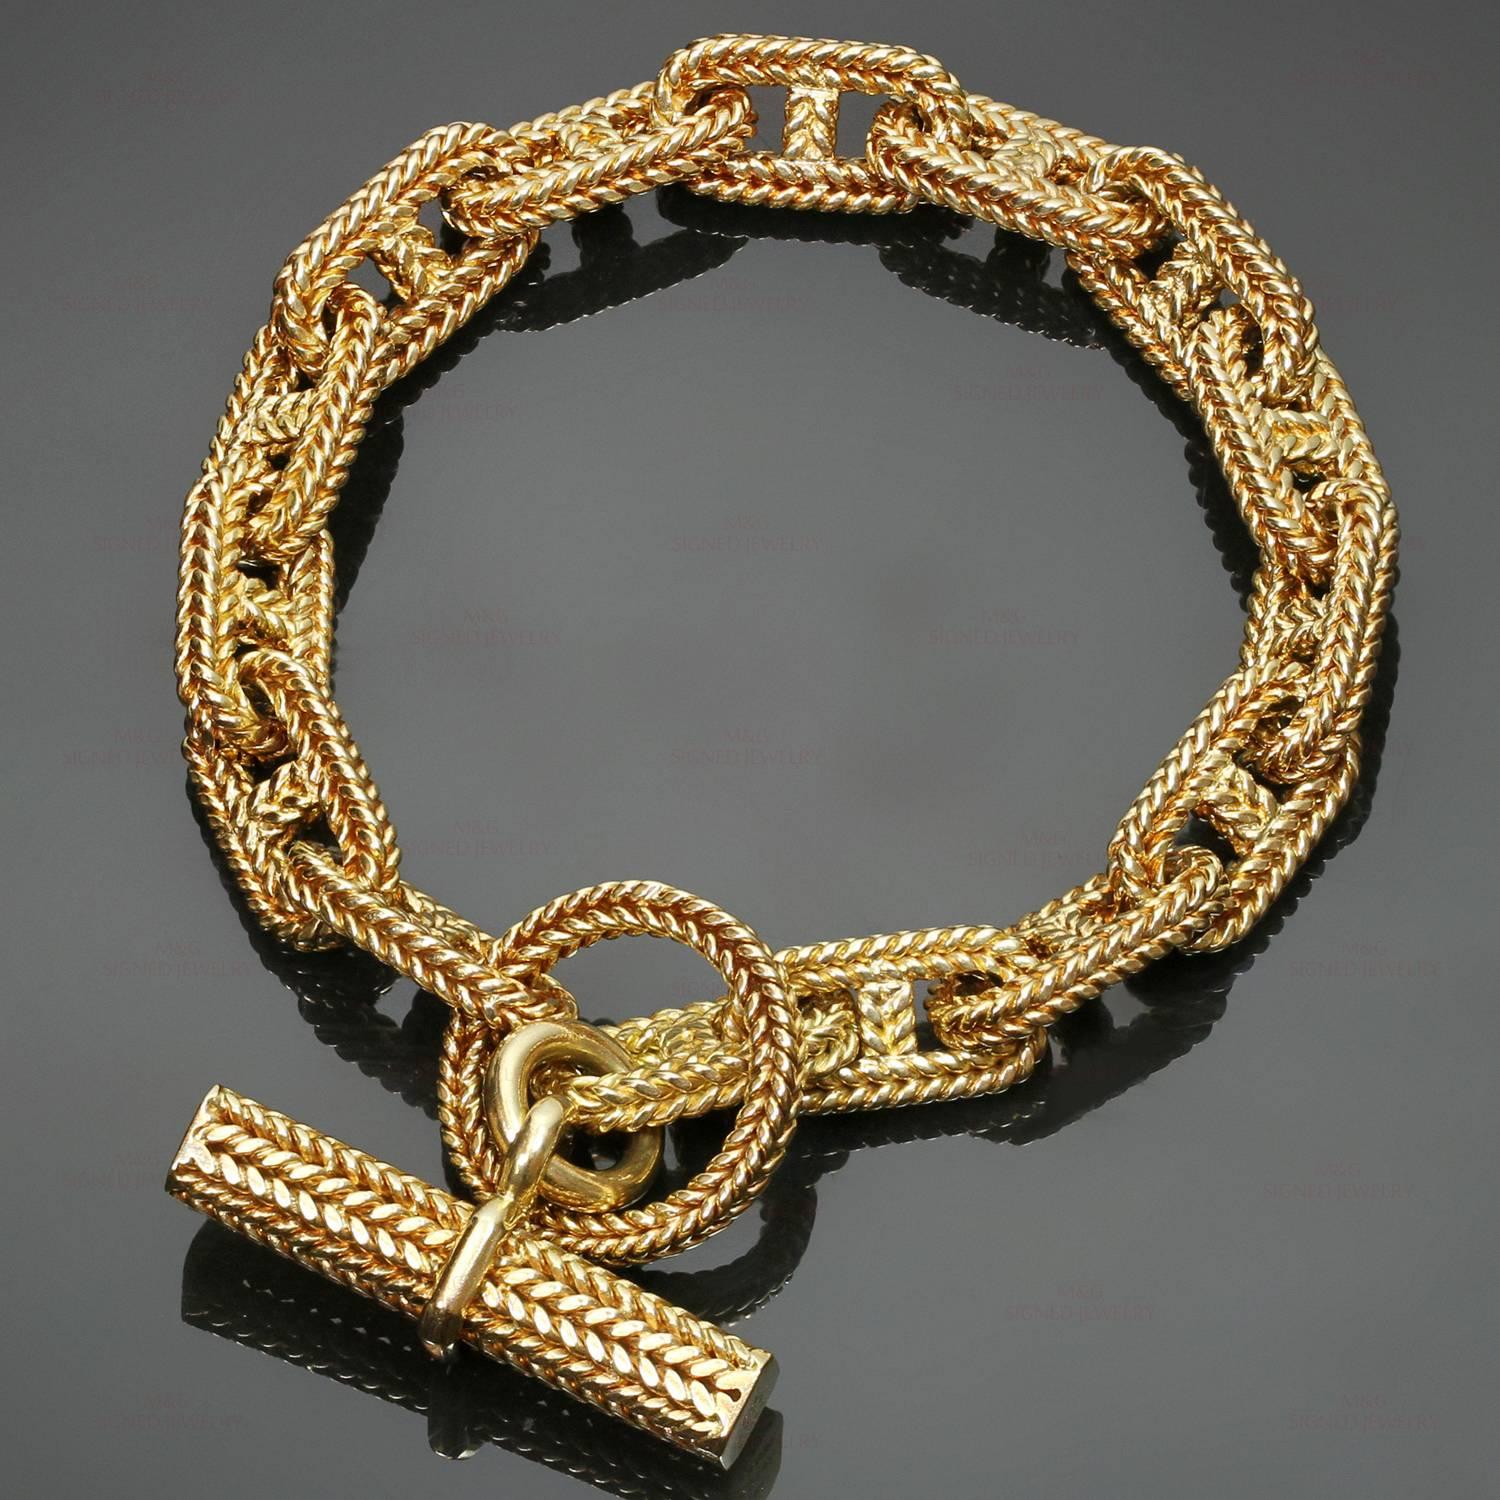 This rare unisex Hermes bracelet is crafted in 18k yellow gold and was designed by George L'enfant for the classic Chain d'Ancre collection. Made in France circa 1960s. Measurements: 0.039" (1mm) width, 9.25" (23.4cm) length. 